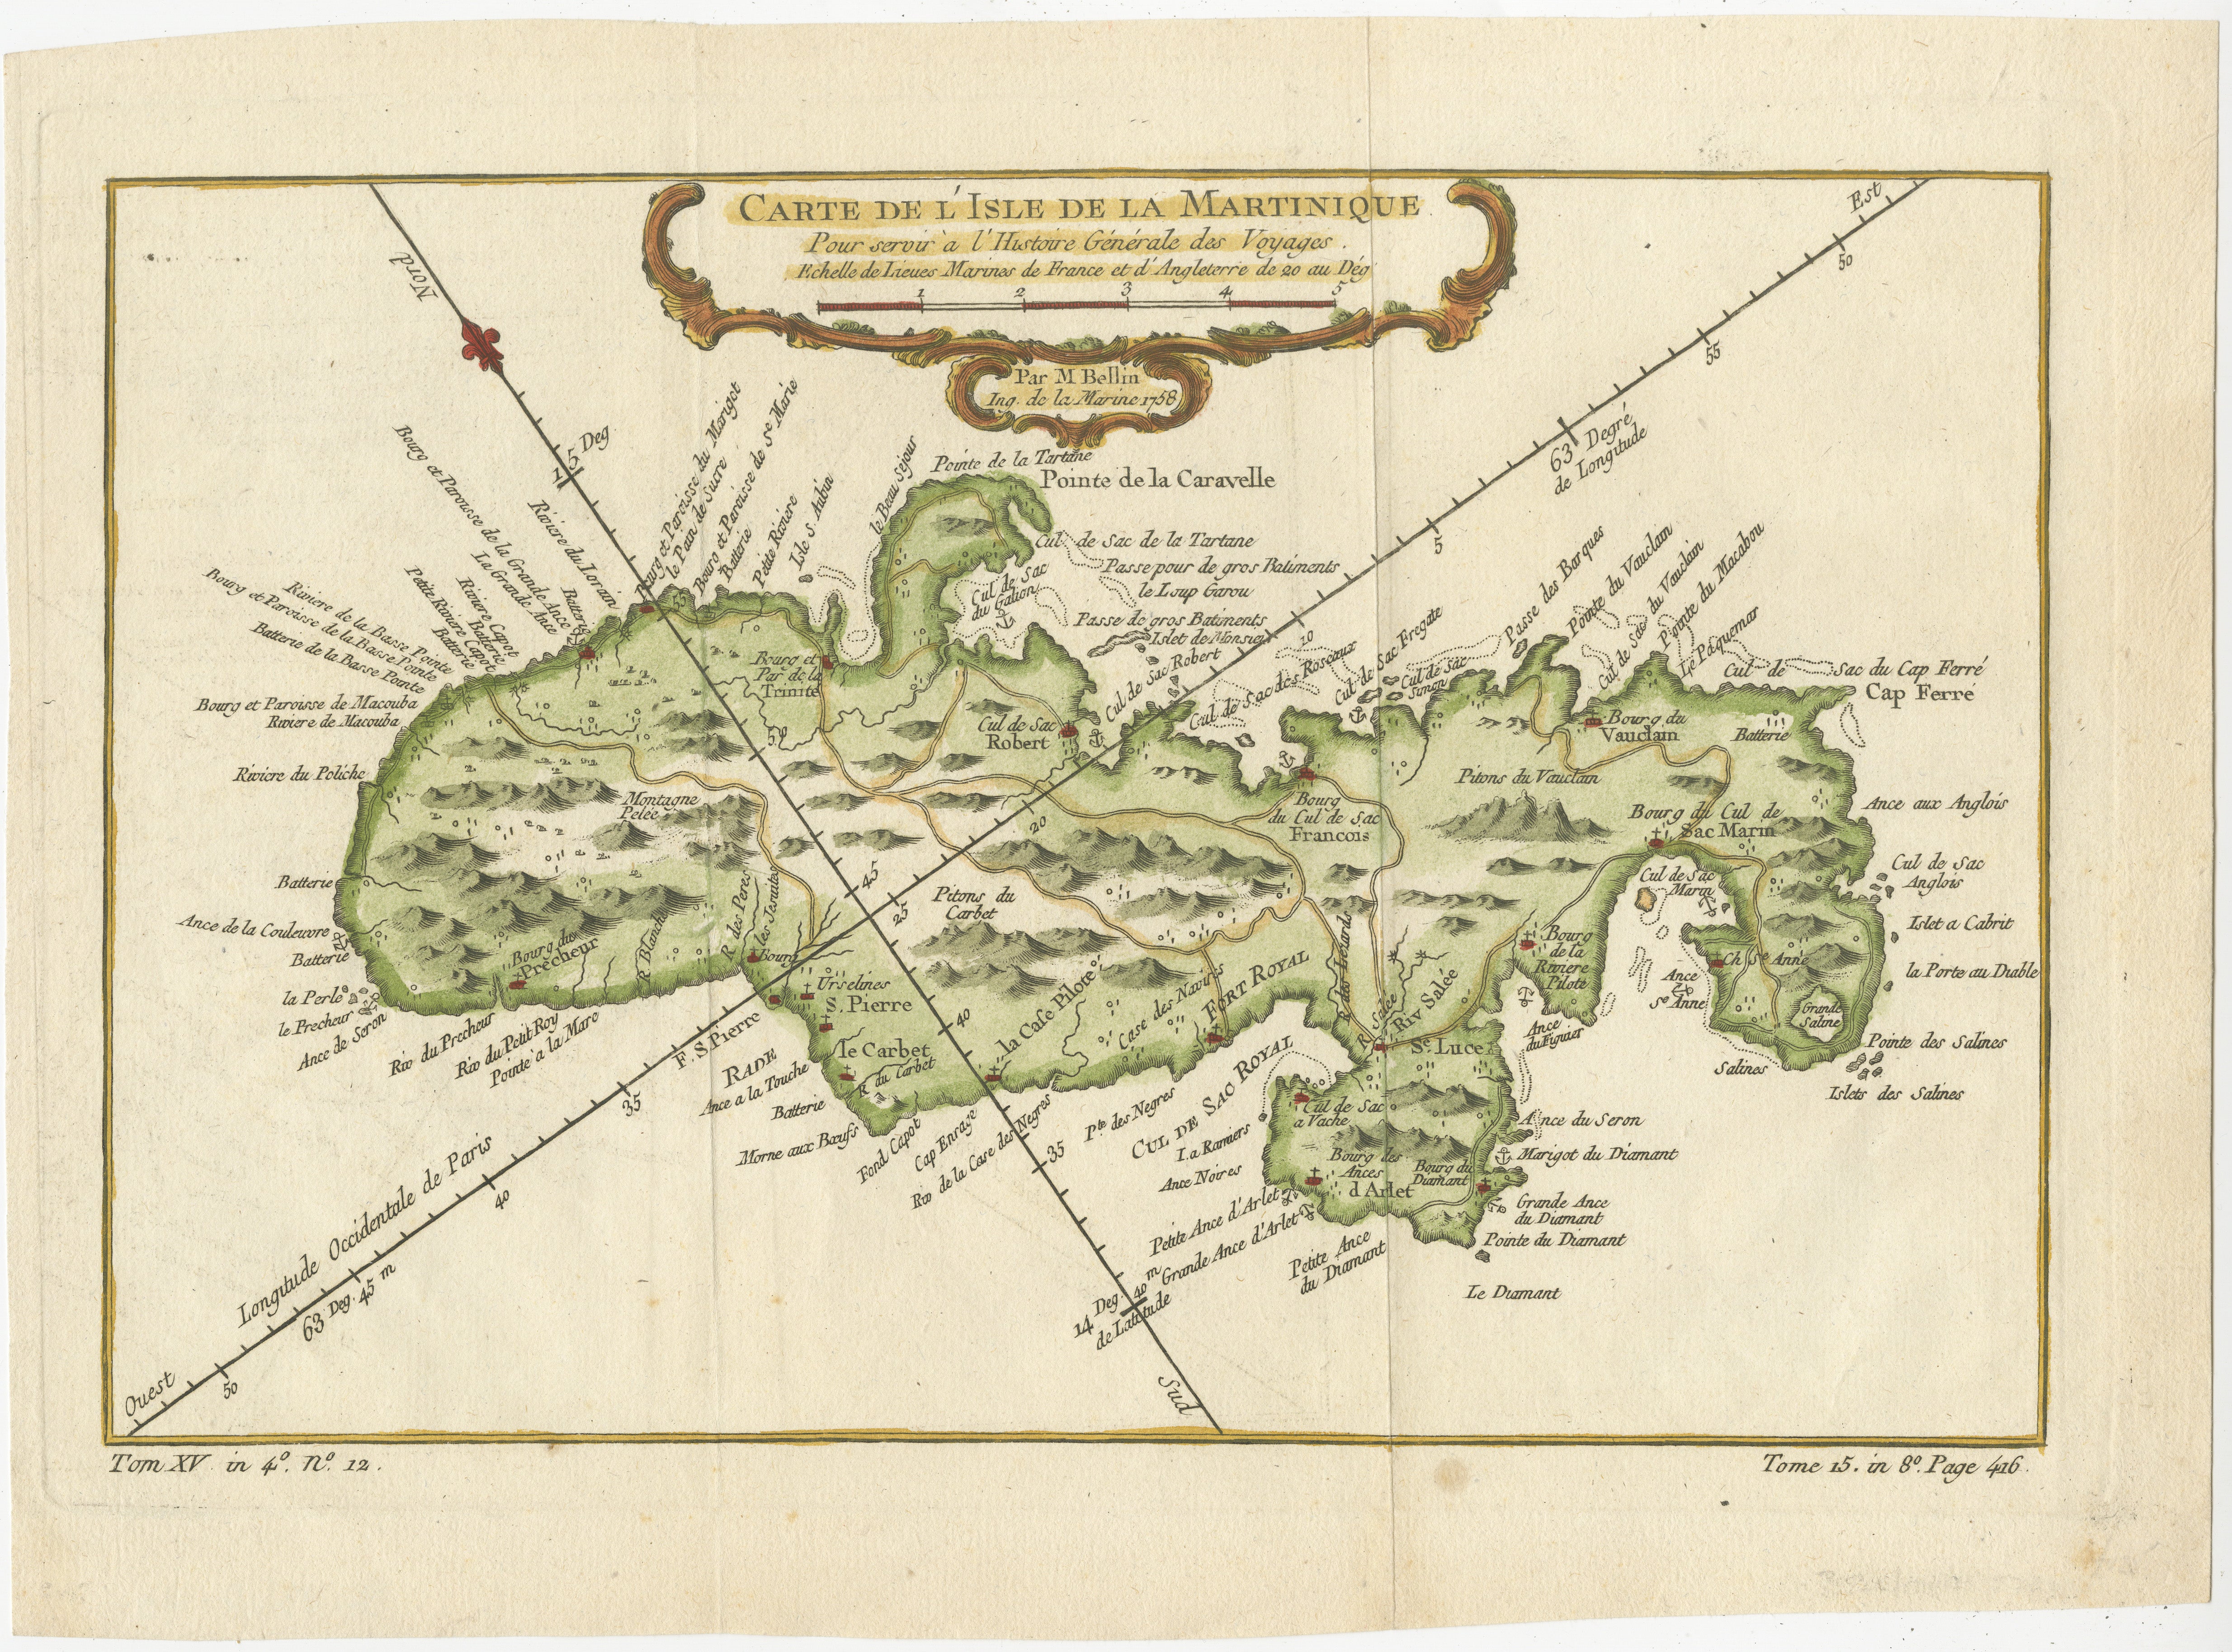 This mid-18th century map, 